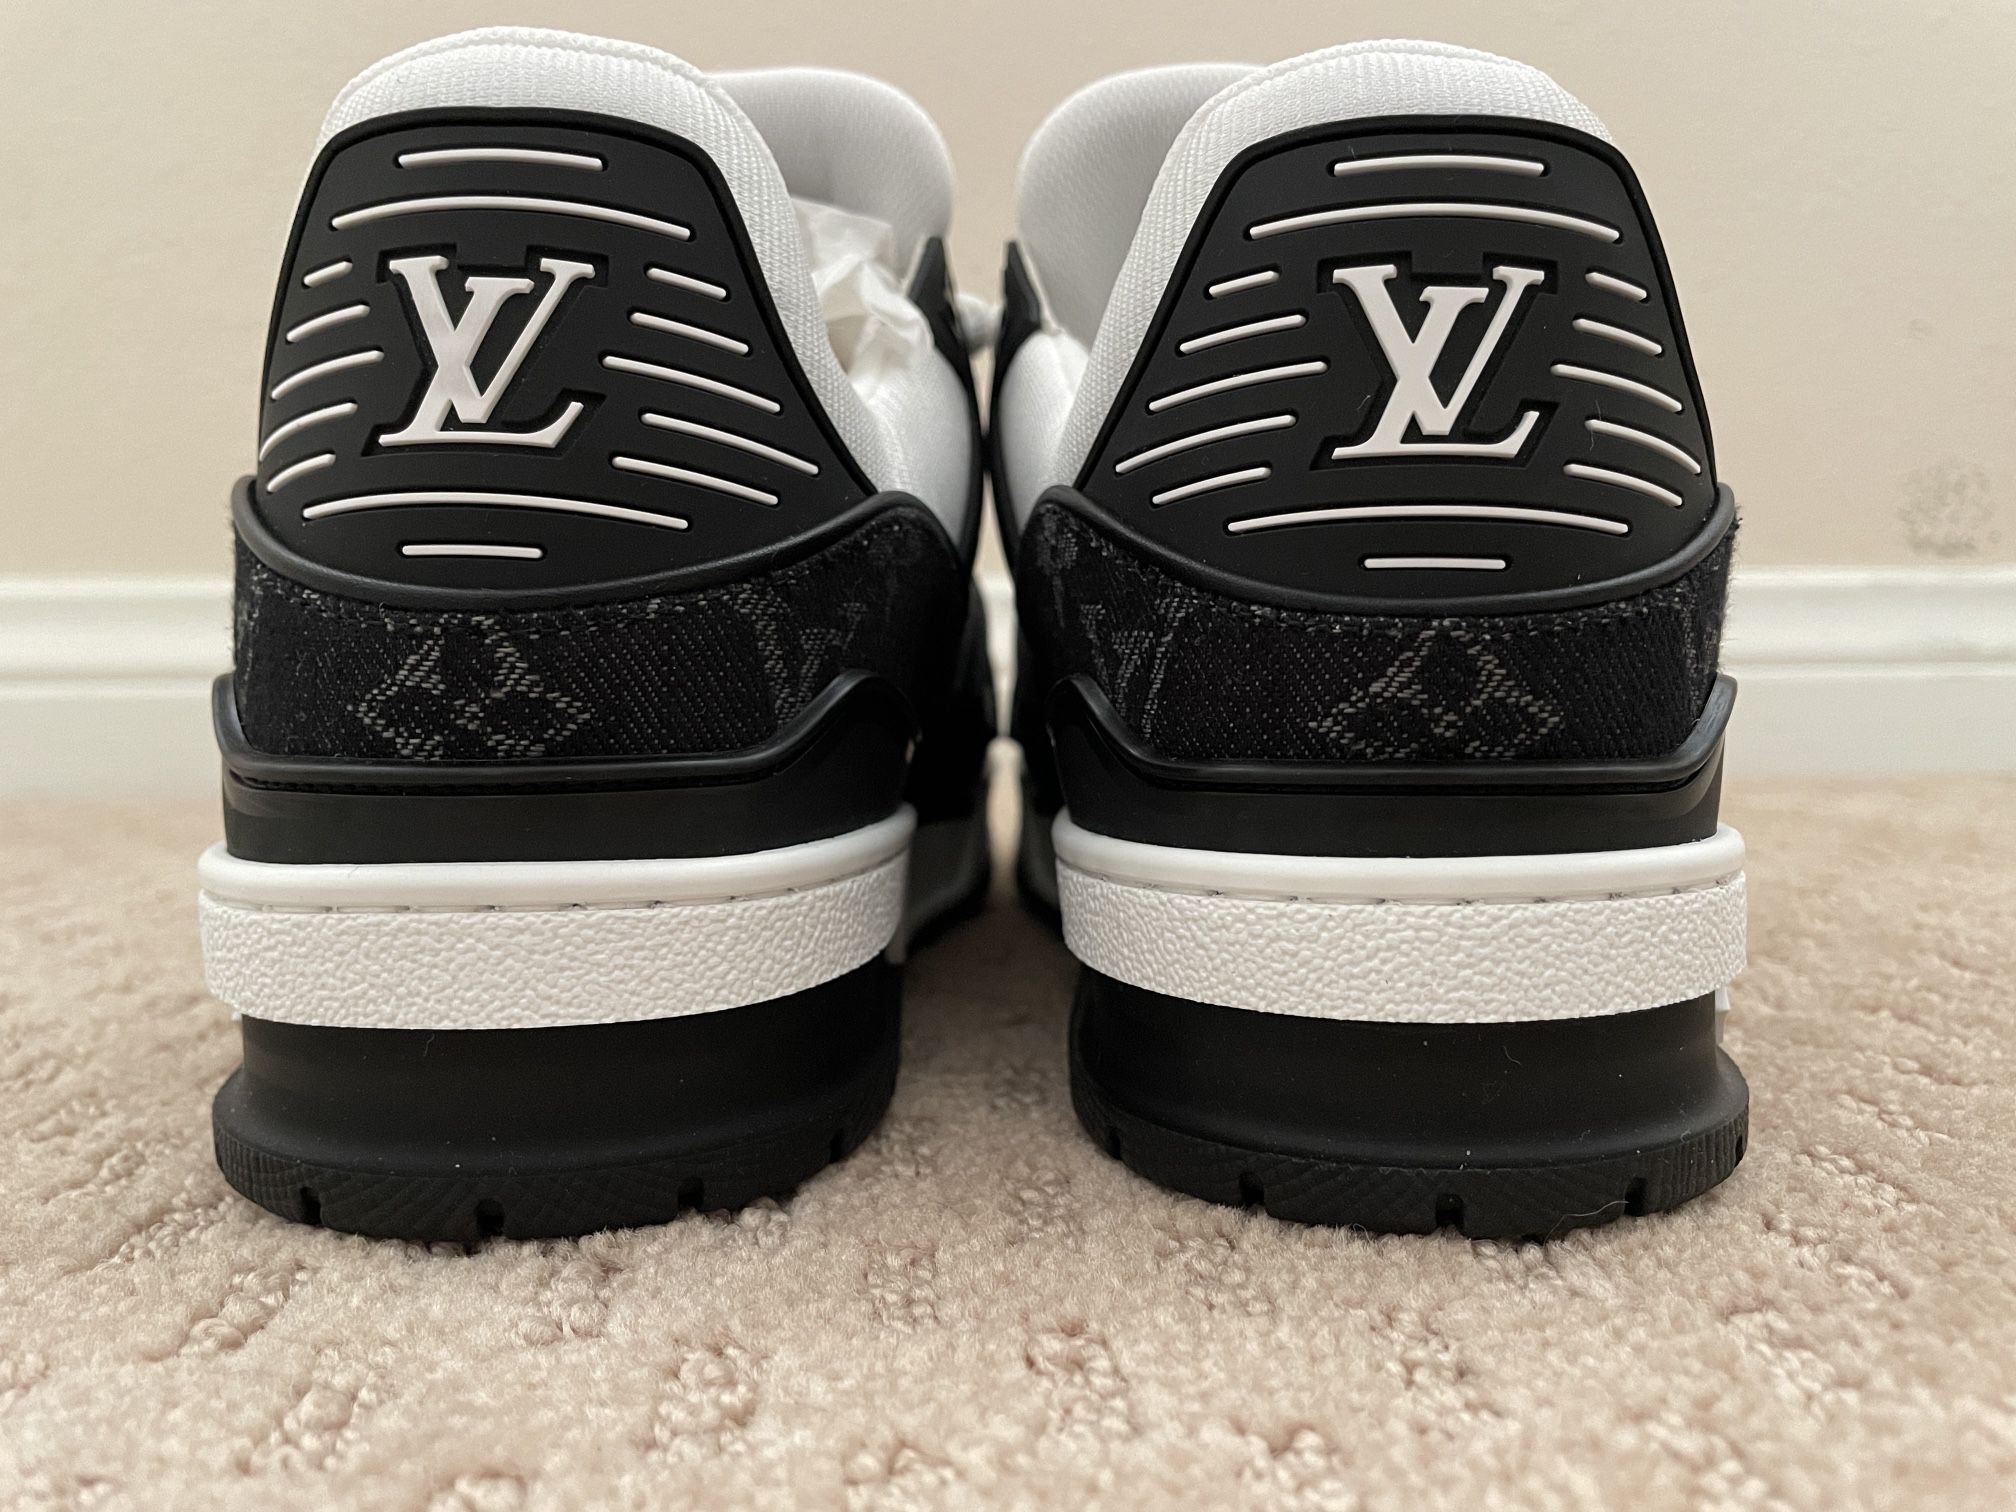 Women's New Louis Vuitton Virgil Abloh Denim Sneakers Size 7 for Sale in  Beverly Hills, CA - OfferUp